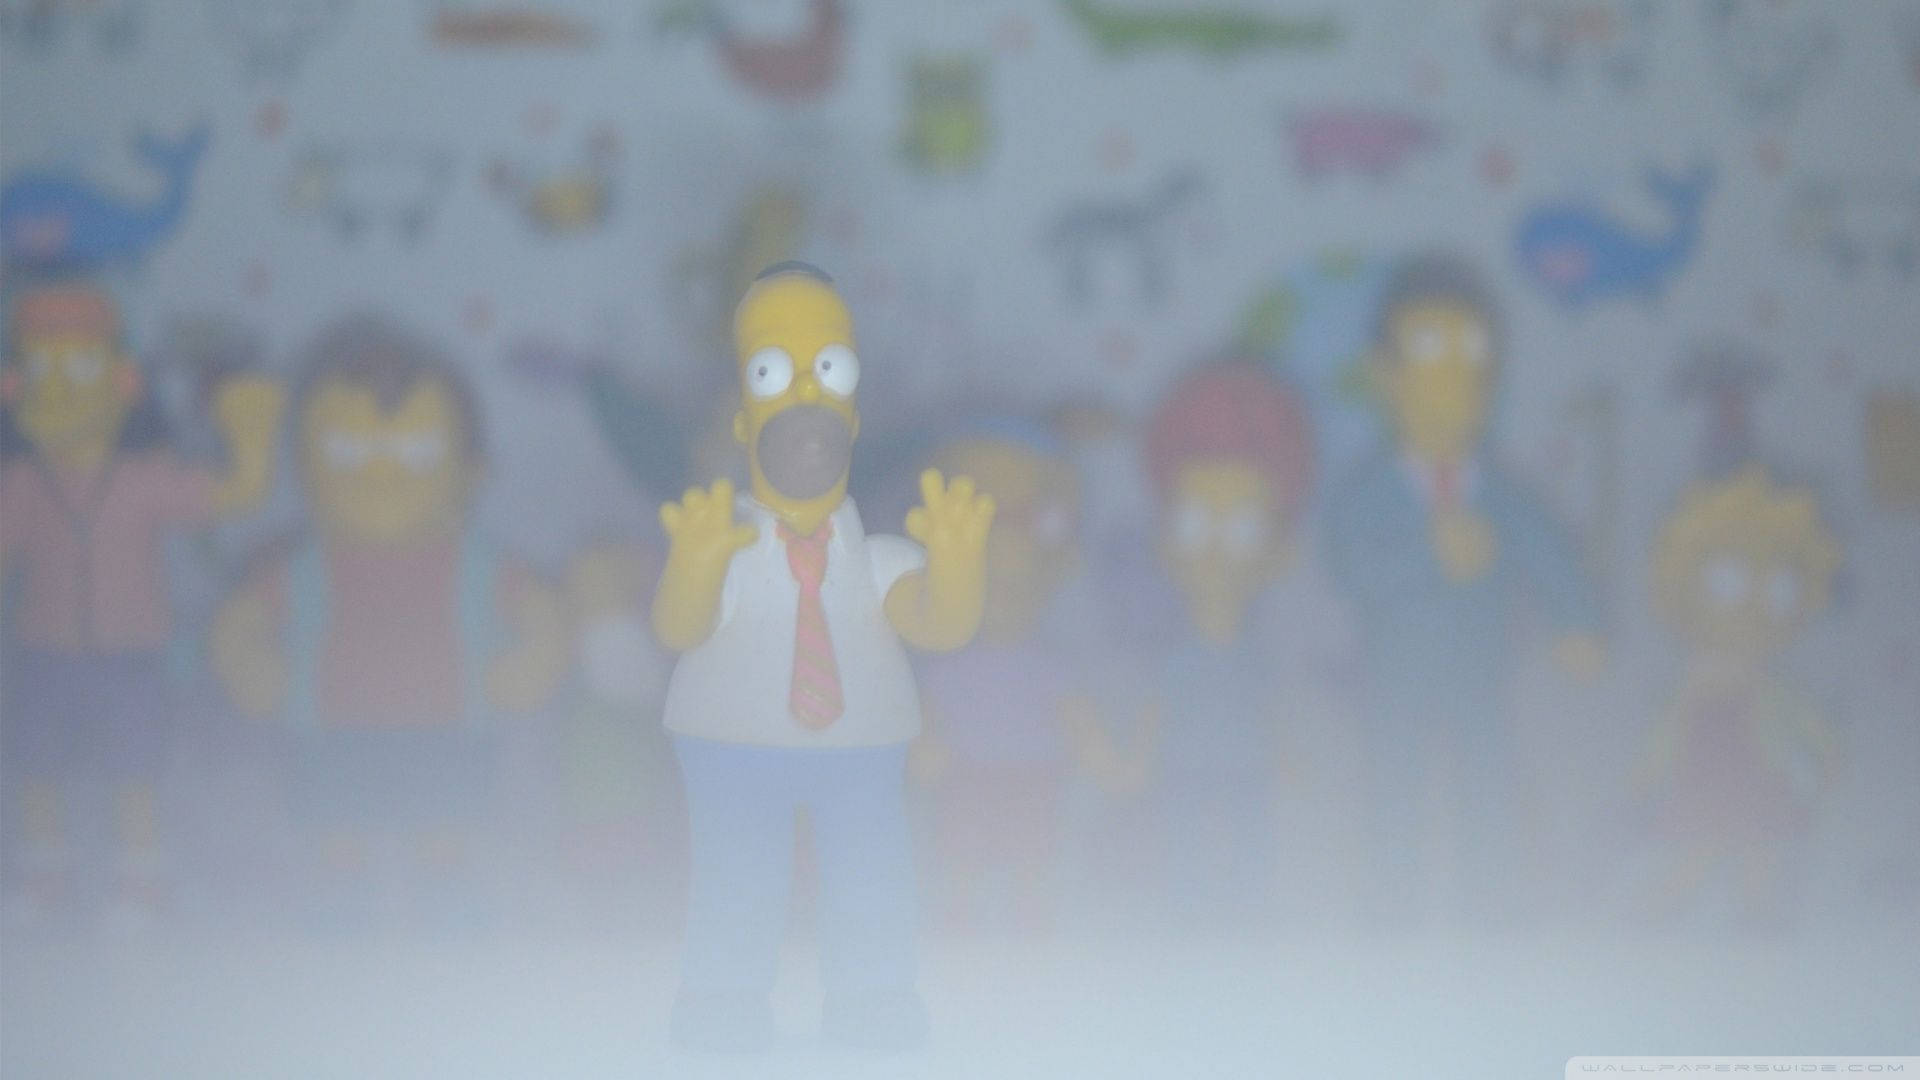 Simpsons 1920X1080 Wallpaper and Background Image